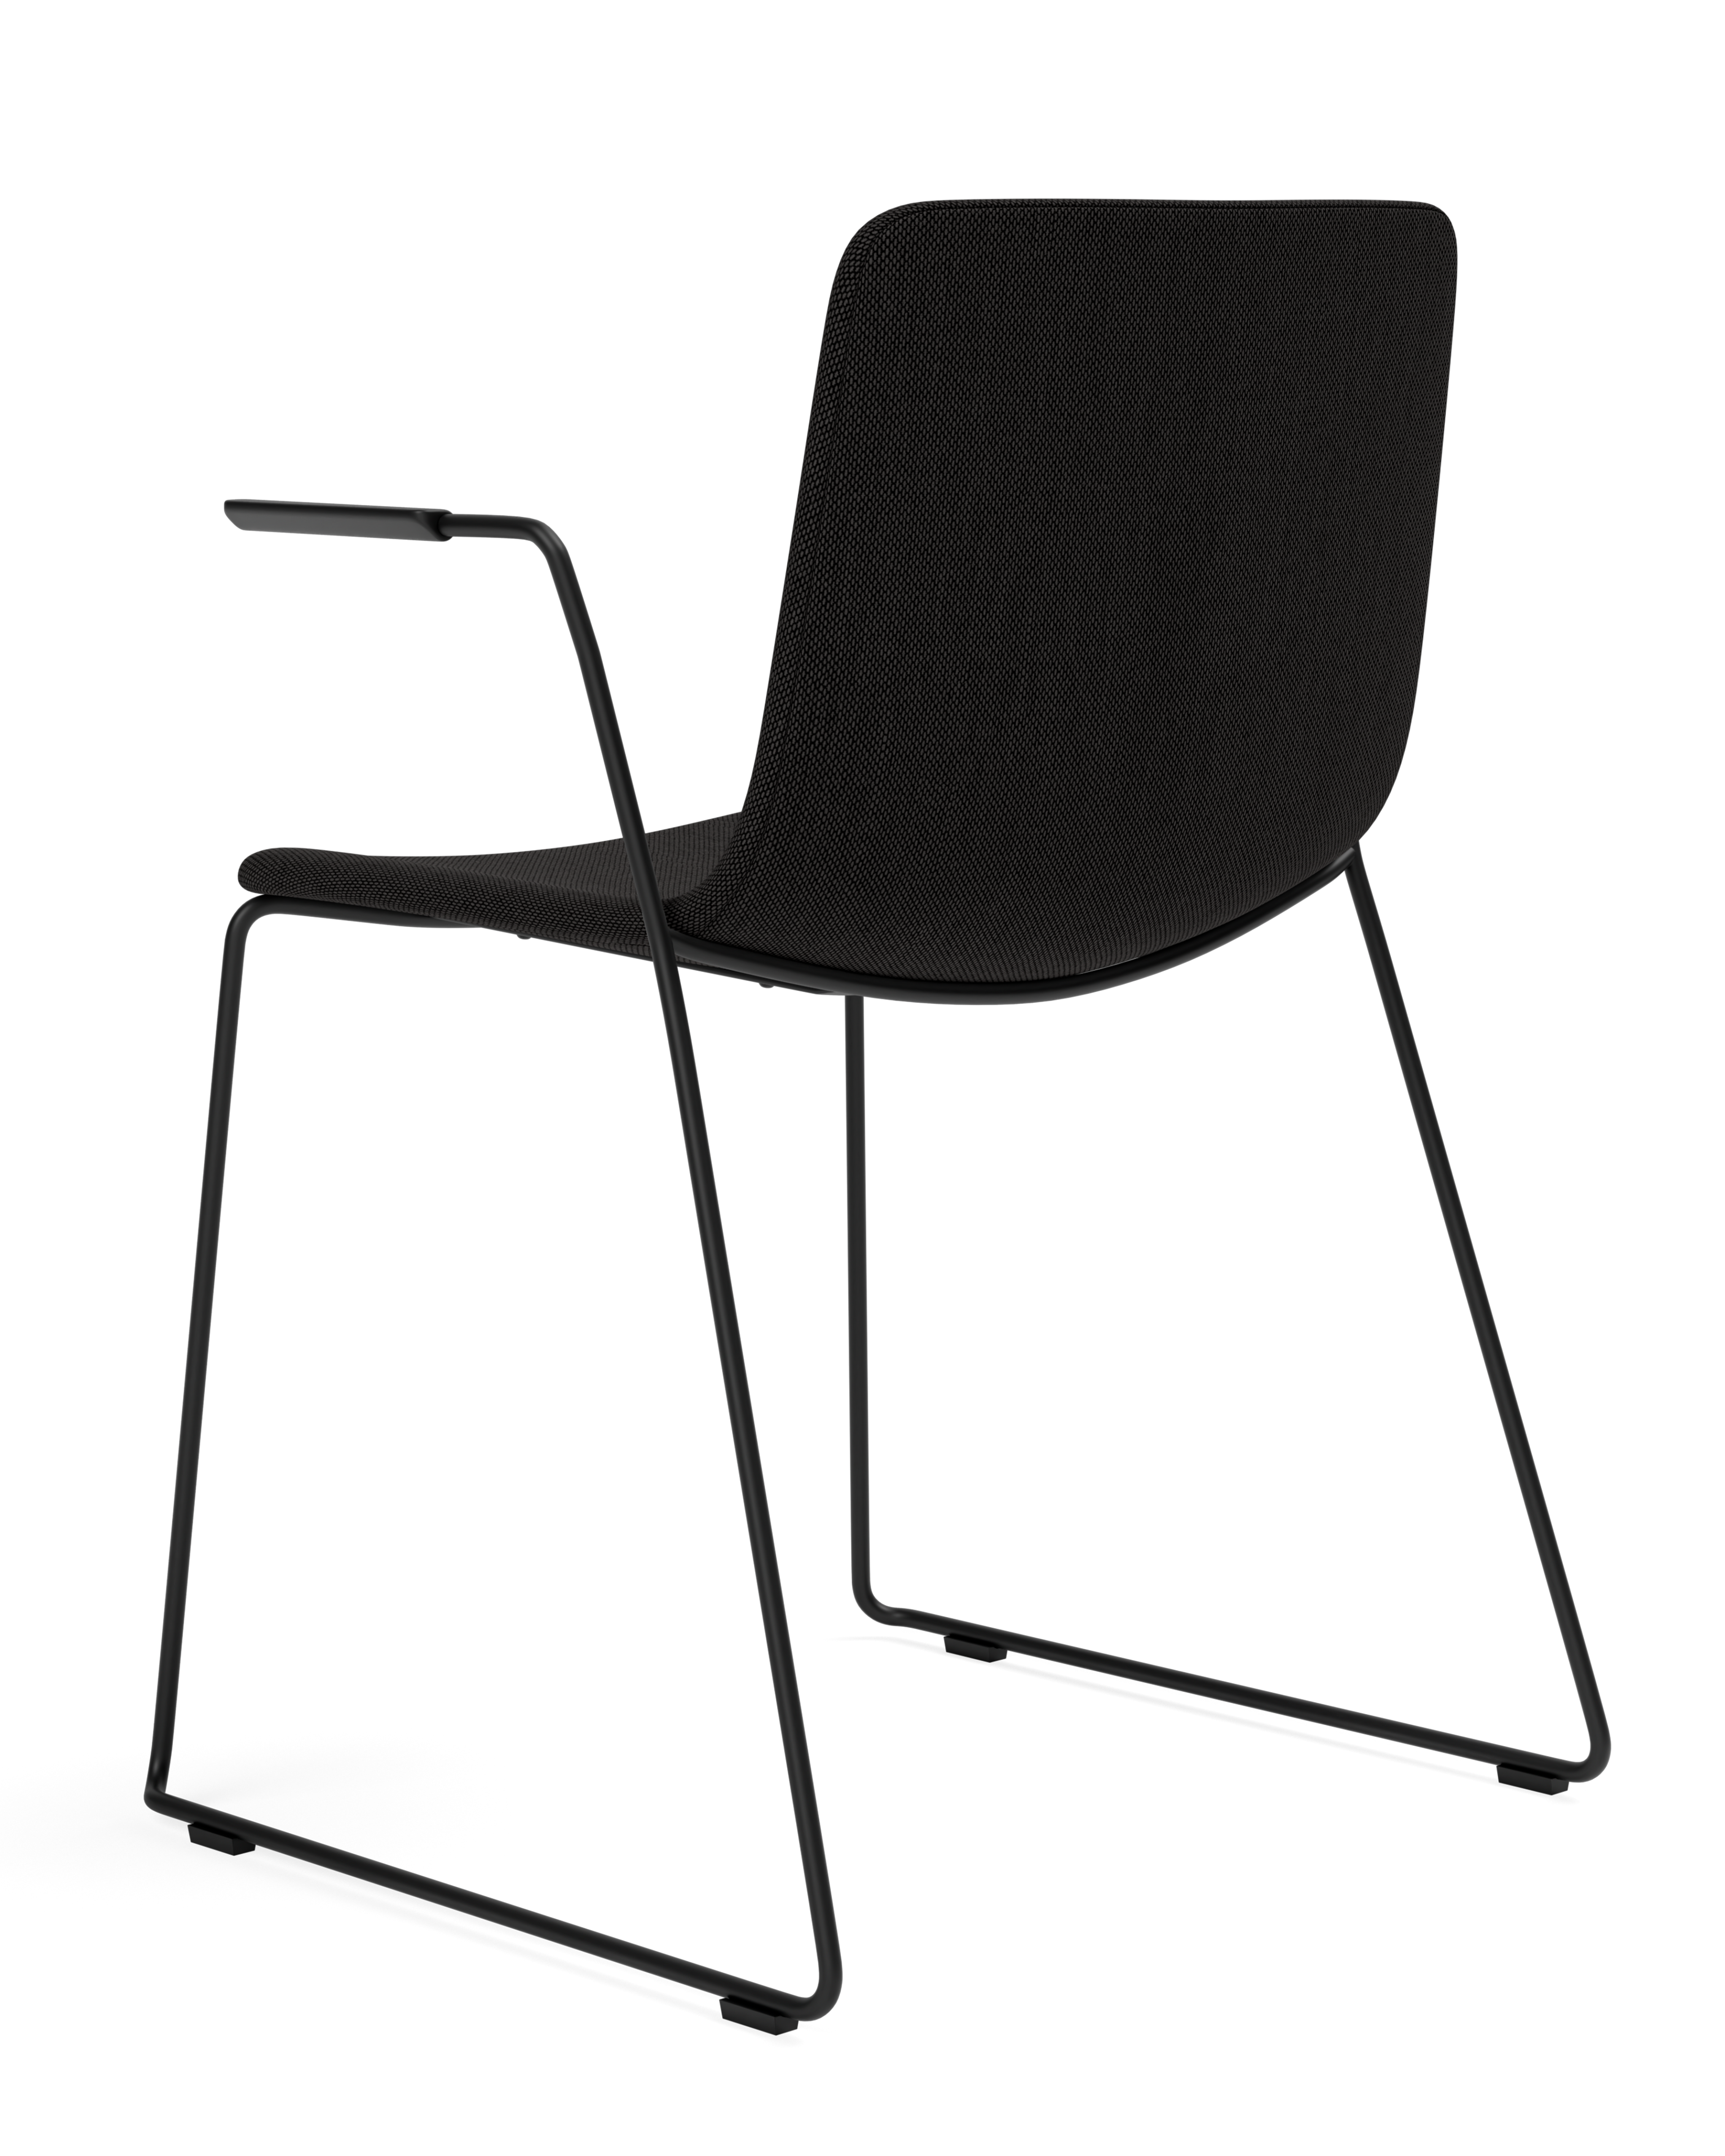 Welling / Ludvik - Pato Sledge Armchair